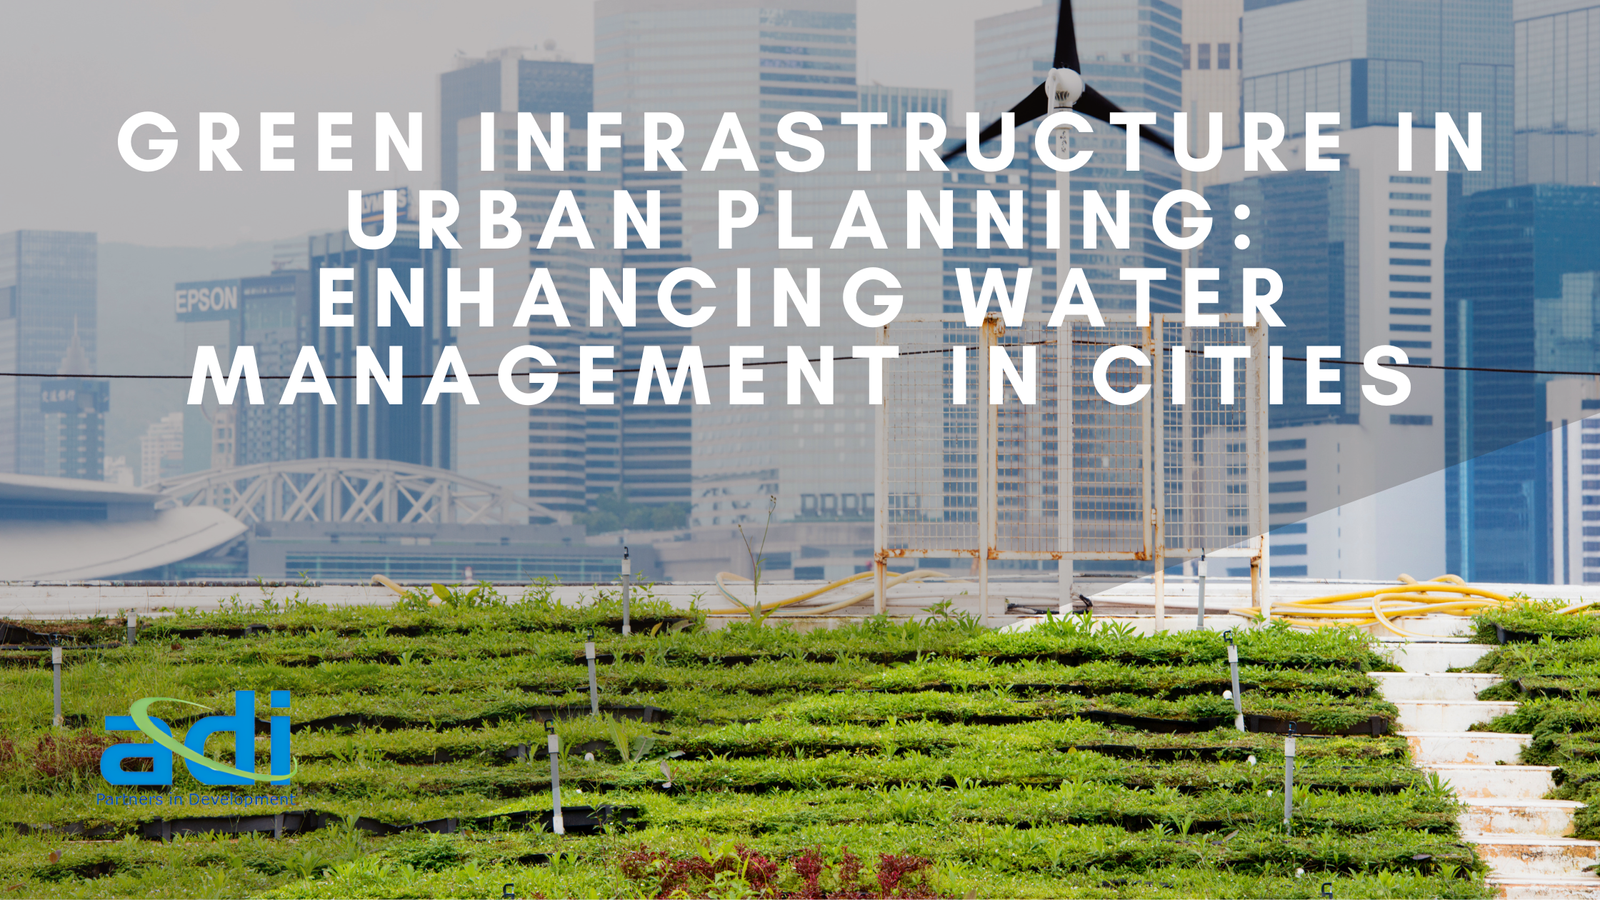 Green Infrastructure in Urban Planning: Enhancing Water Management in Cities